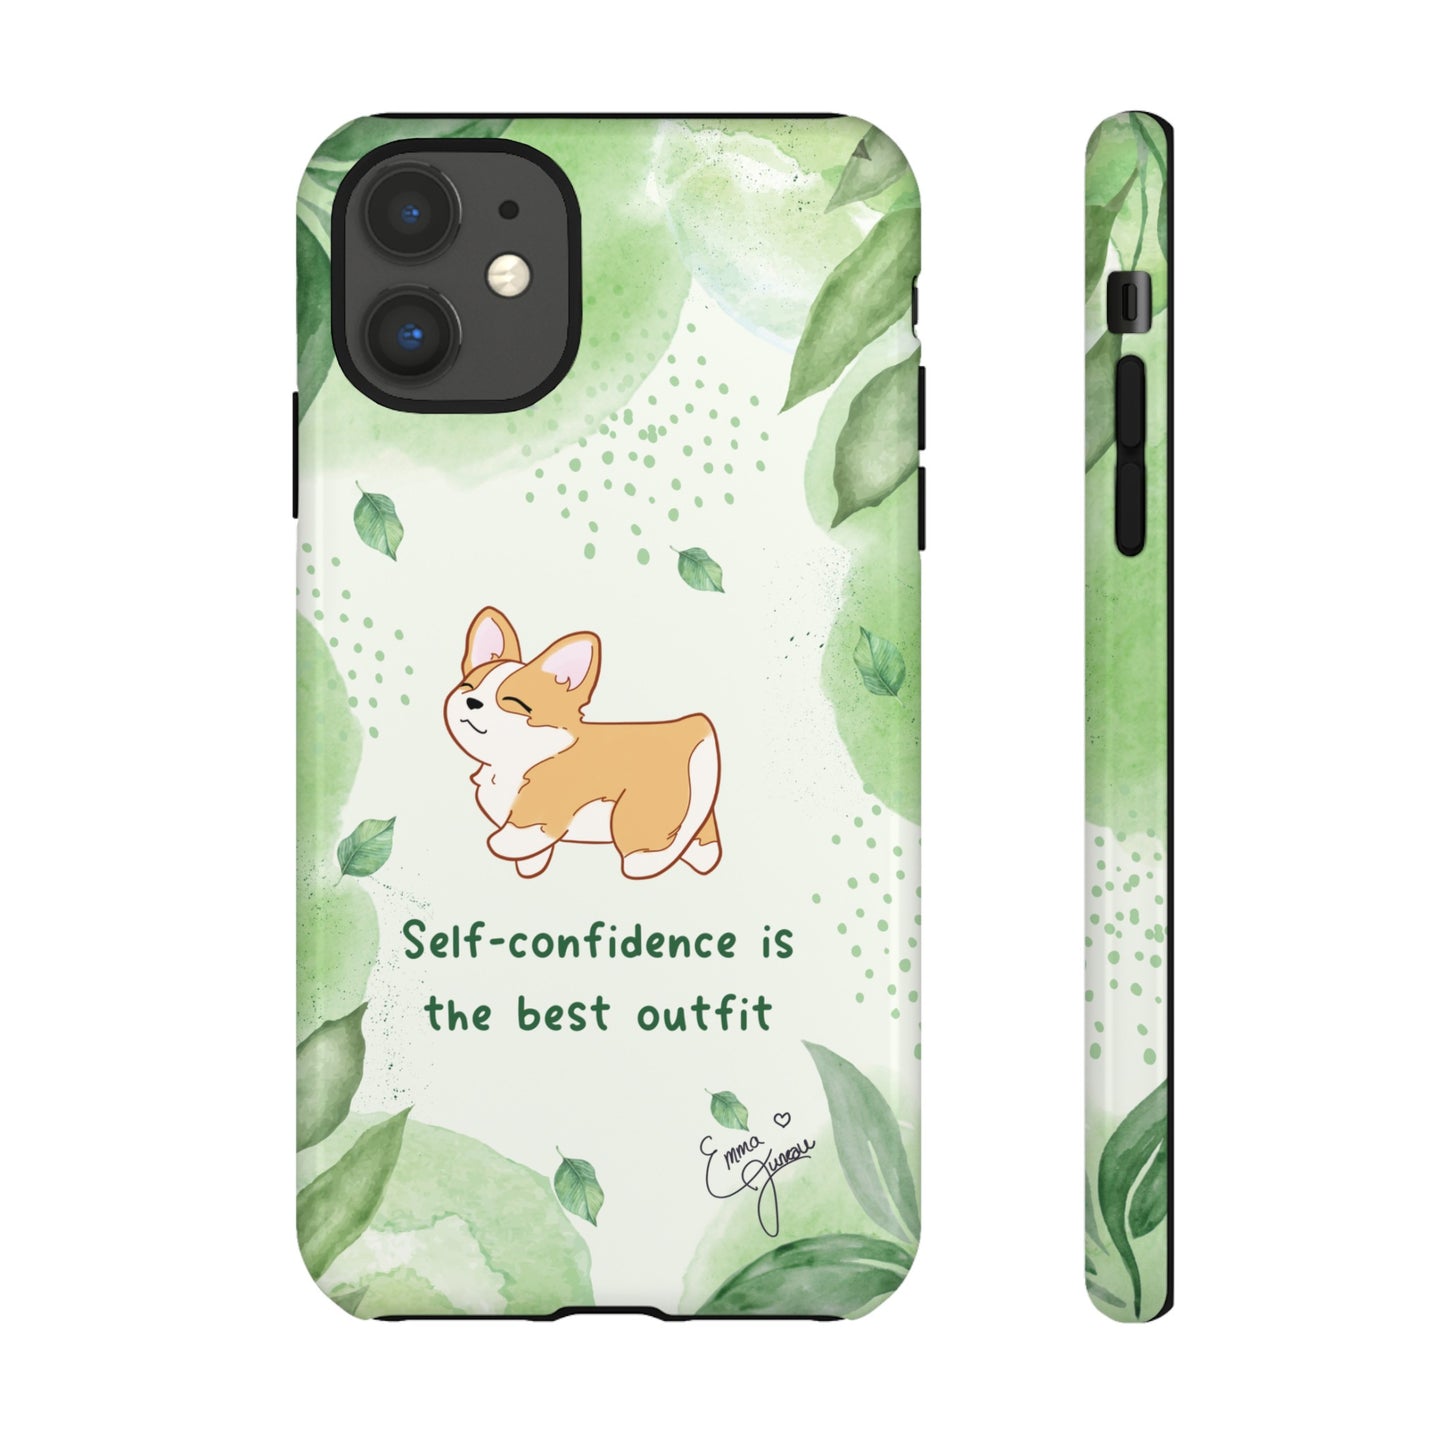 Corgi Green Tough Phone Case - Self Confidence is the Best Outfit